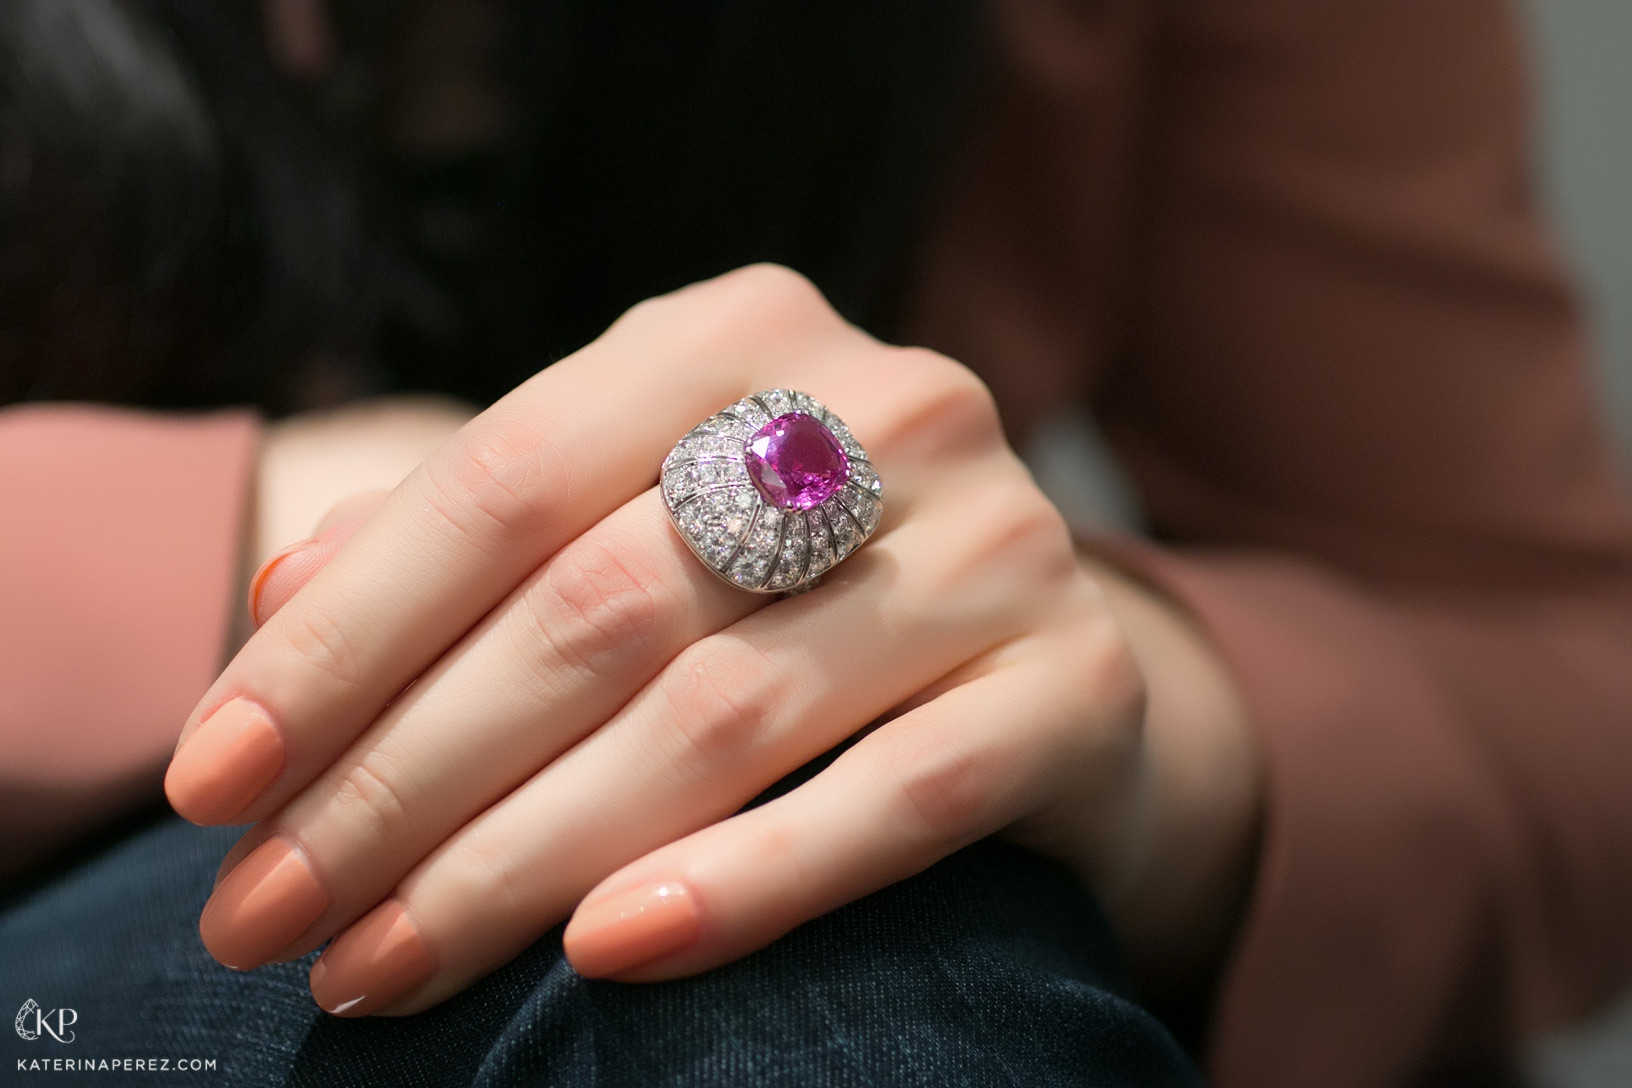 Picchiotti ring with pink 6.46ct rubellite and diamonds